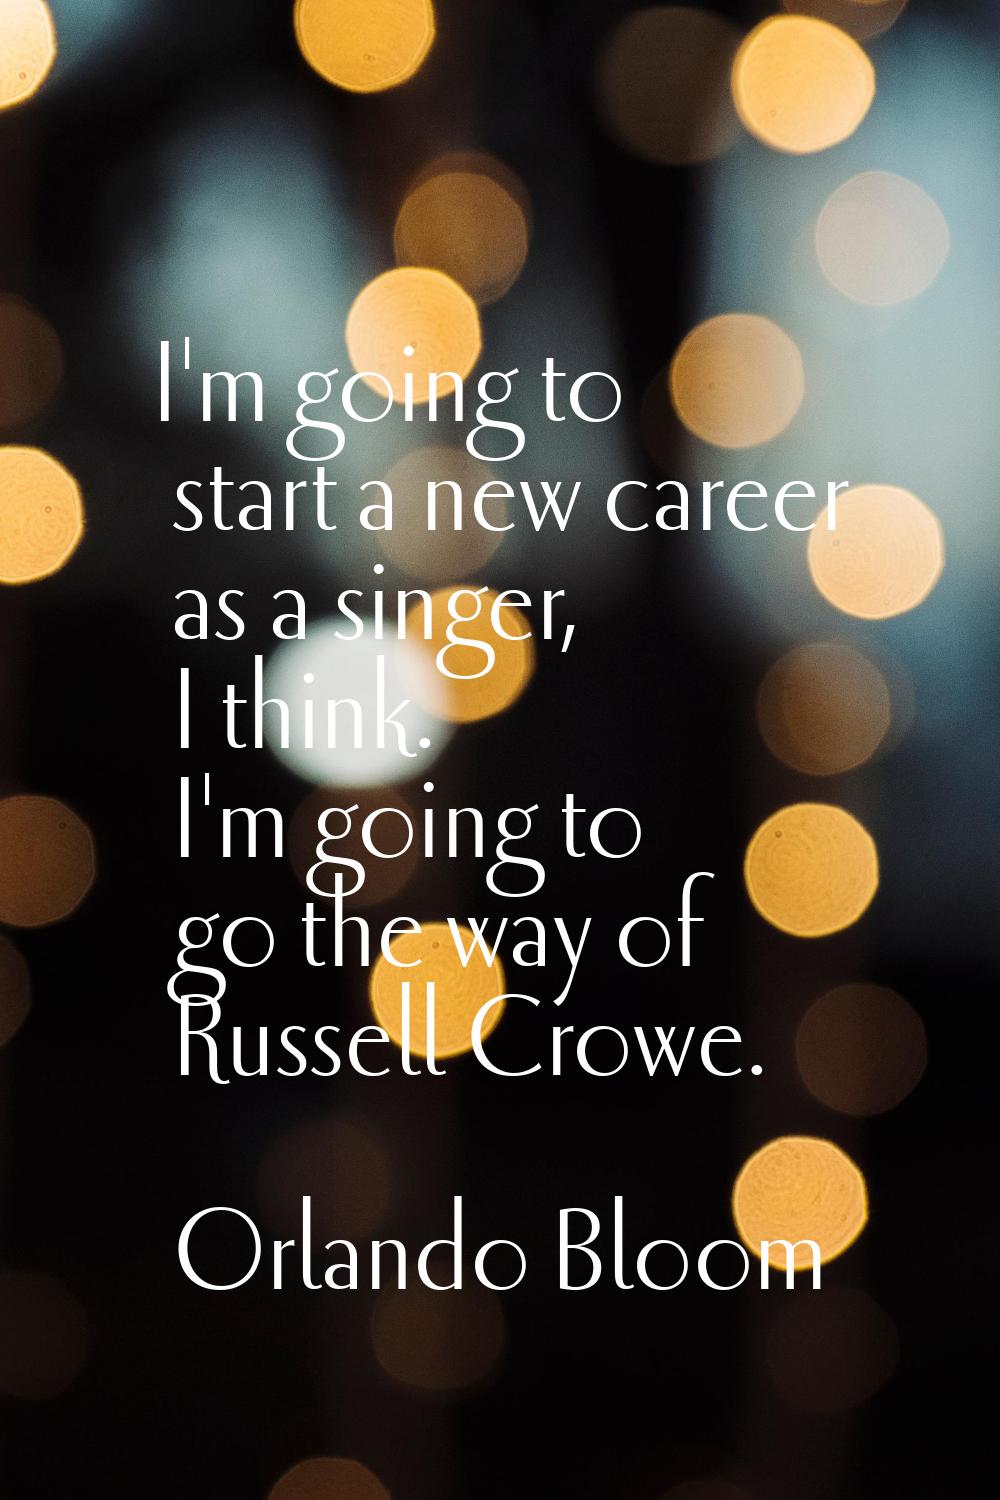 I'm going to start a new career as a singer, I think. I'm going to go the way of Russell Crowe.